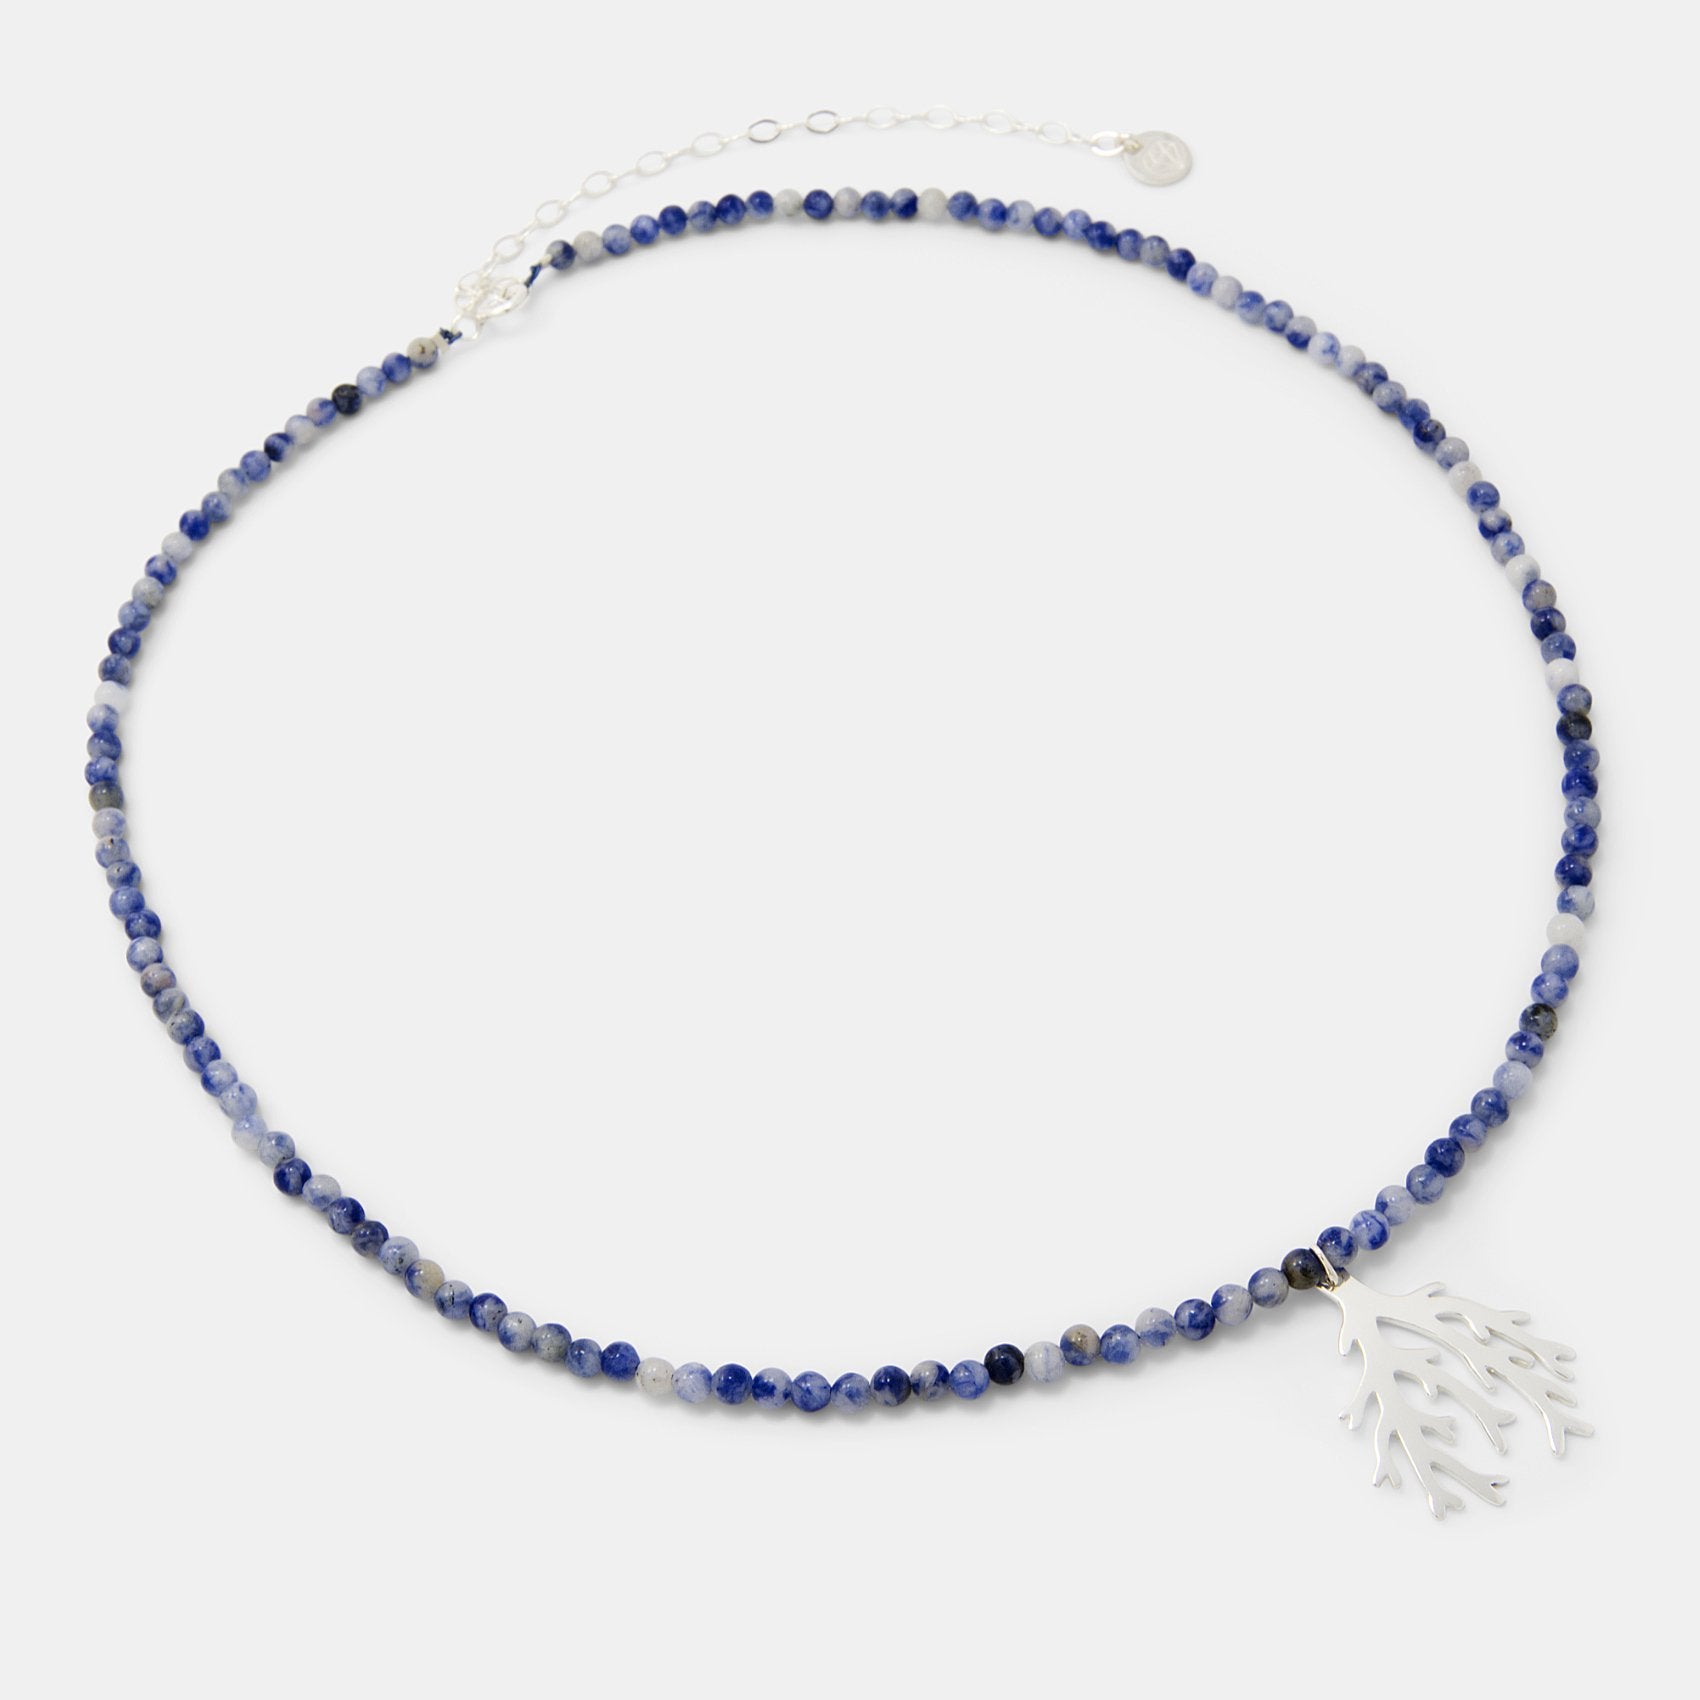 Branch coral on sodalite beaded necklace - Simone Walsh Jewellery Australia